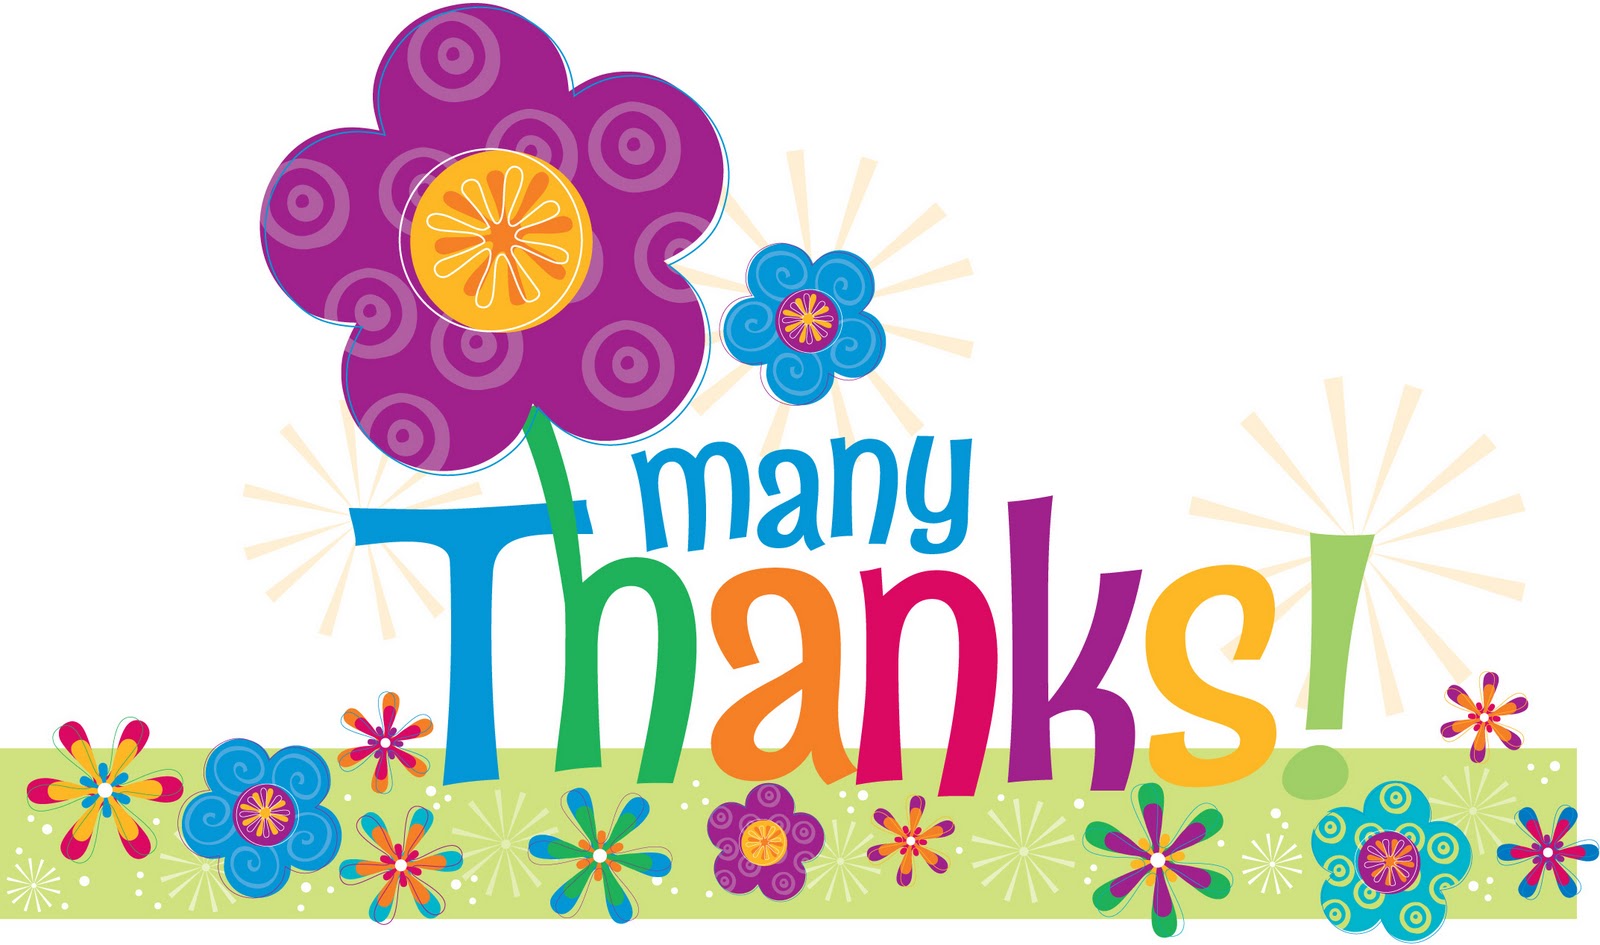 Free Thank You Clipart, Download Free Clip Art, Free Clip ...